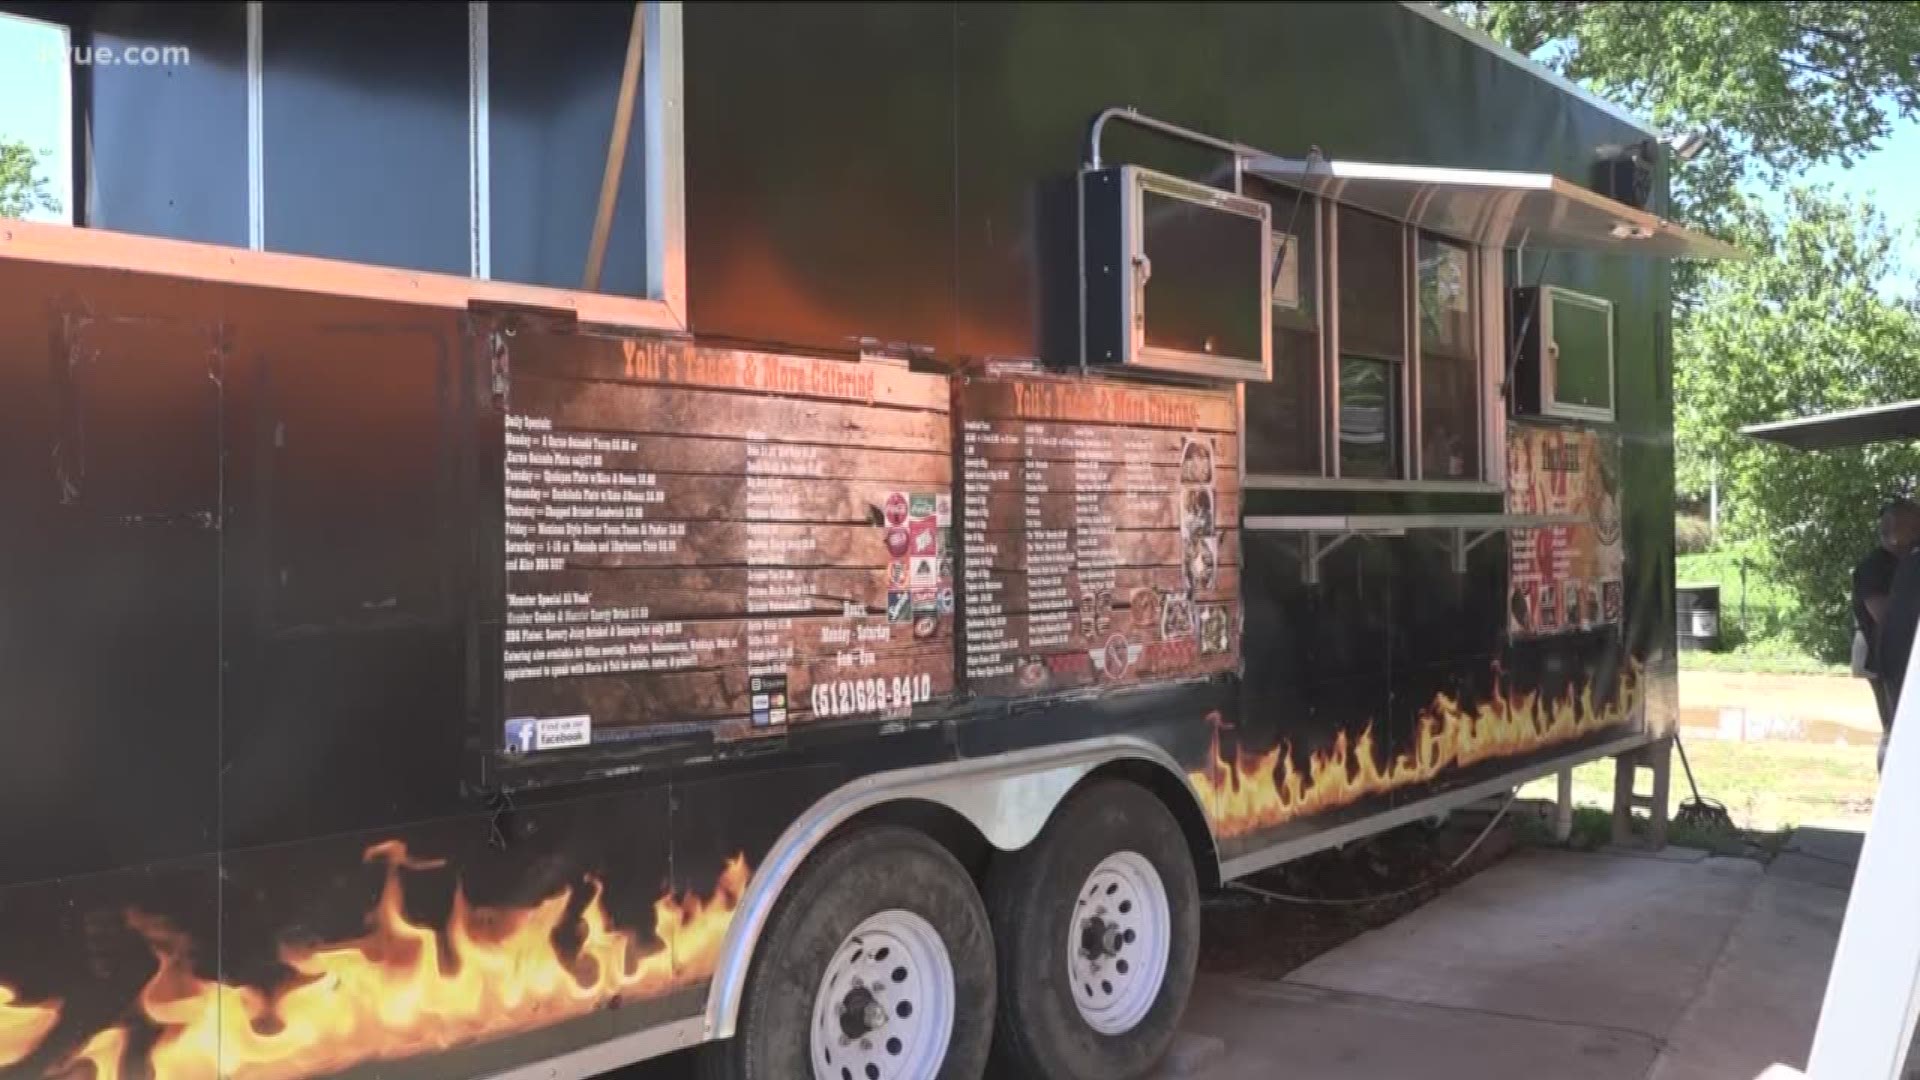 Bastrop is putting the final touches on a pilot program that allows food trucks to set up shop within the city limits.